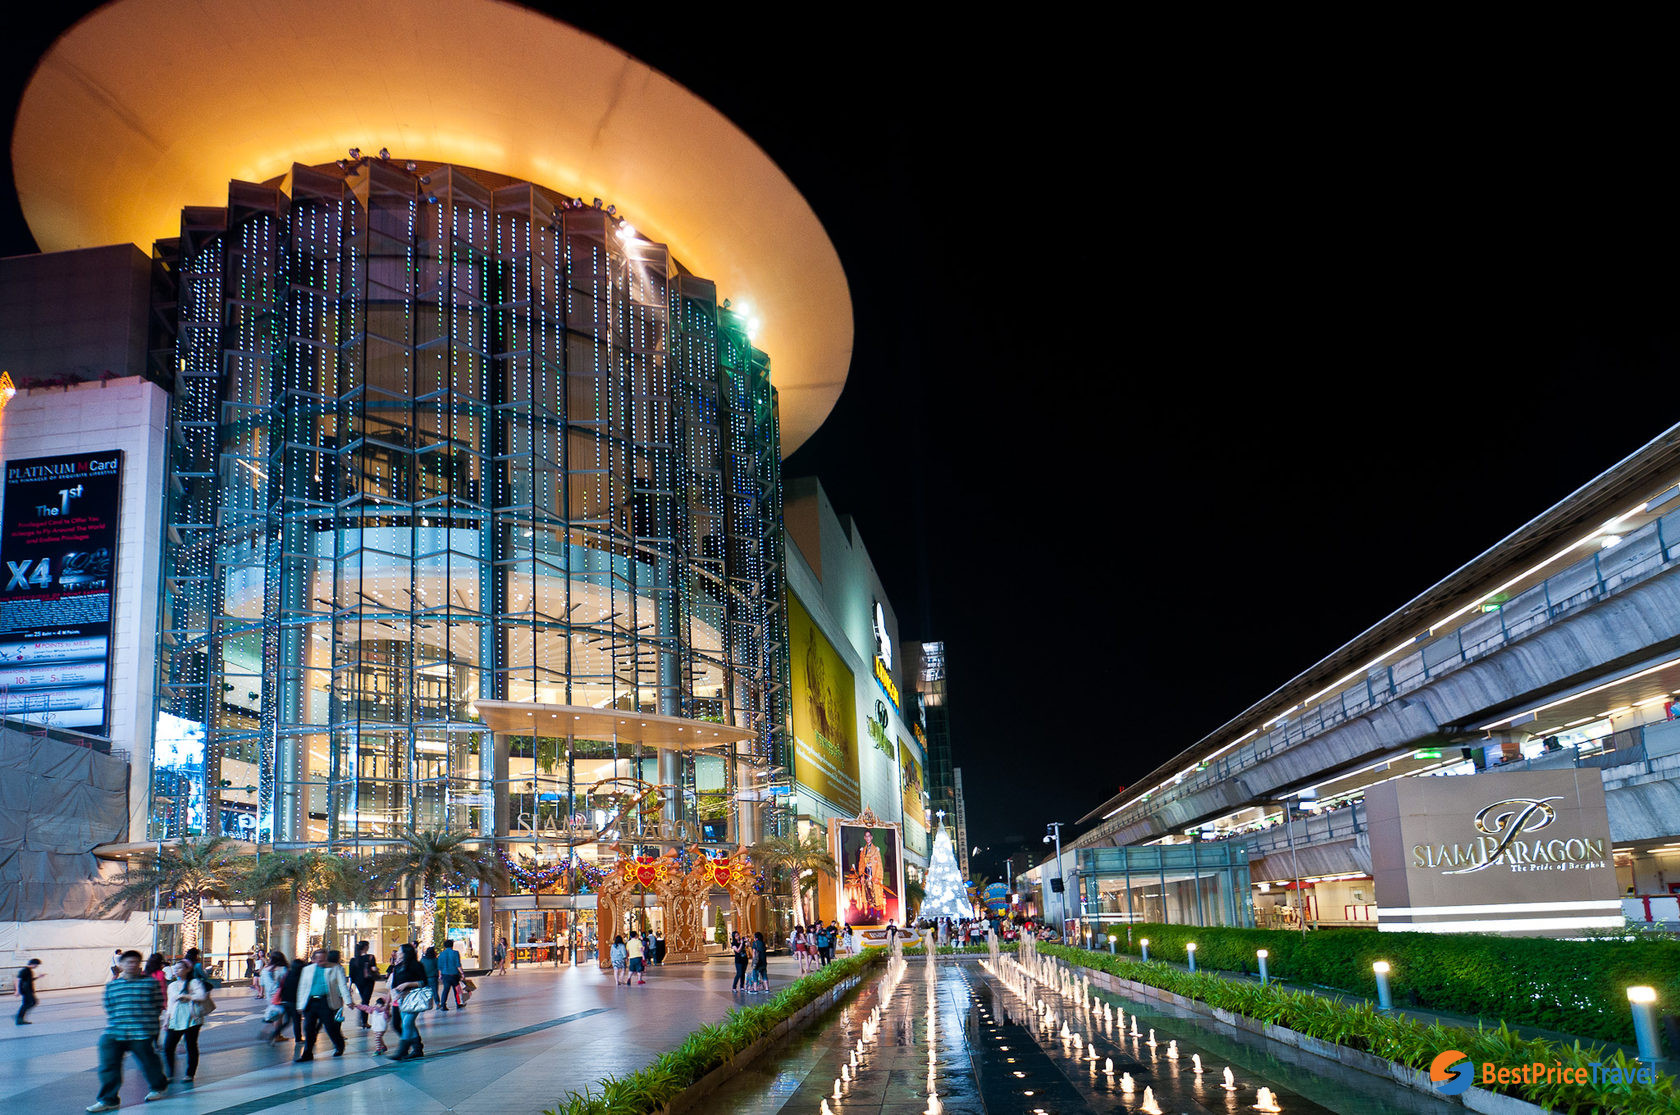 Siam Paragon is the most popular shopping mall in Bangkok